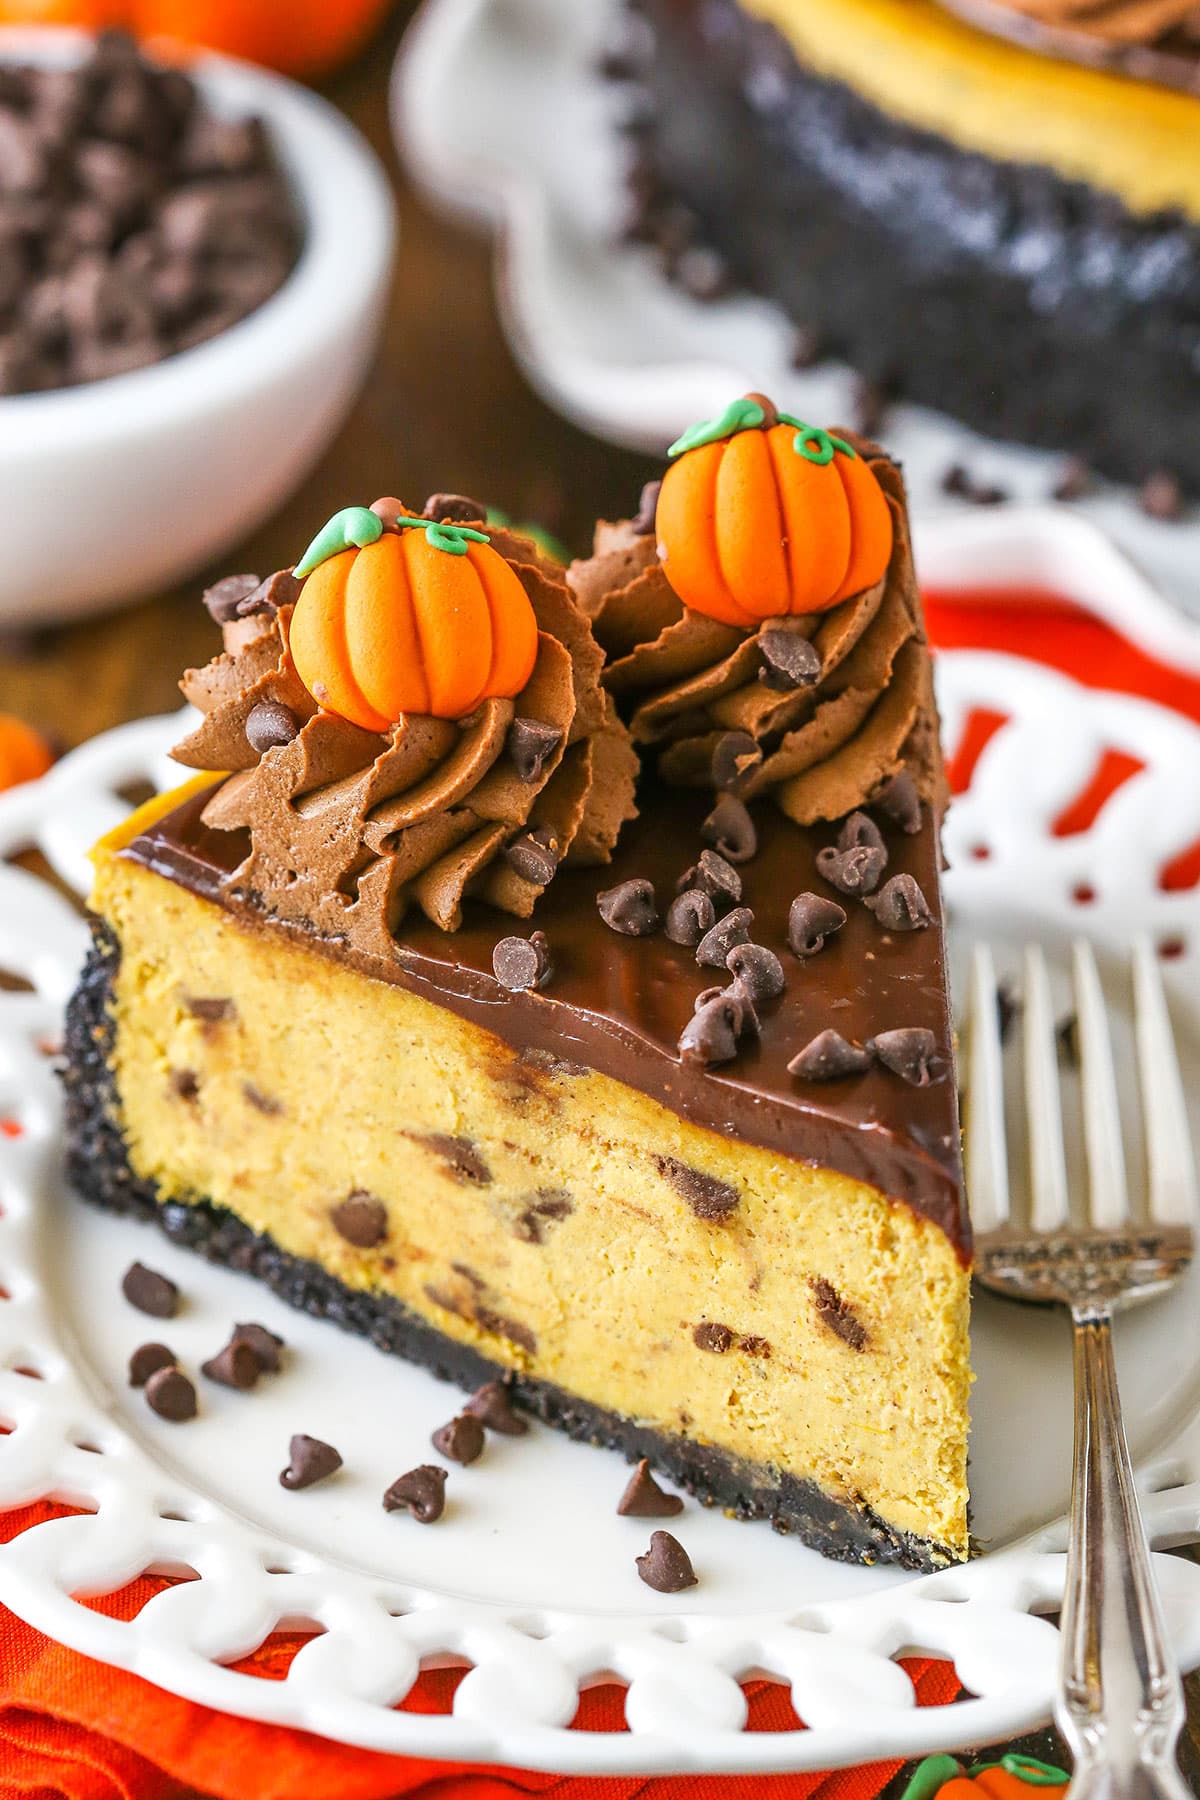 A slice of Chocolate Chip Pumpkin Cheesecake next to a silver fork on a white plate